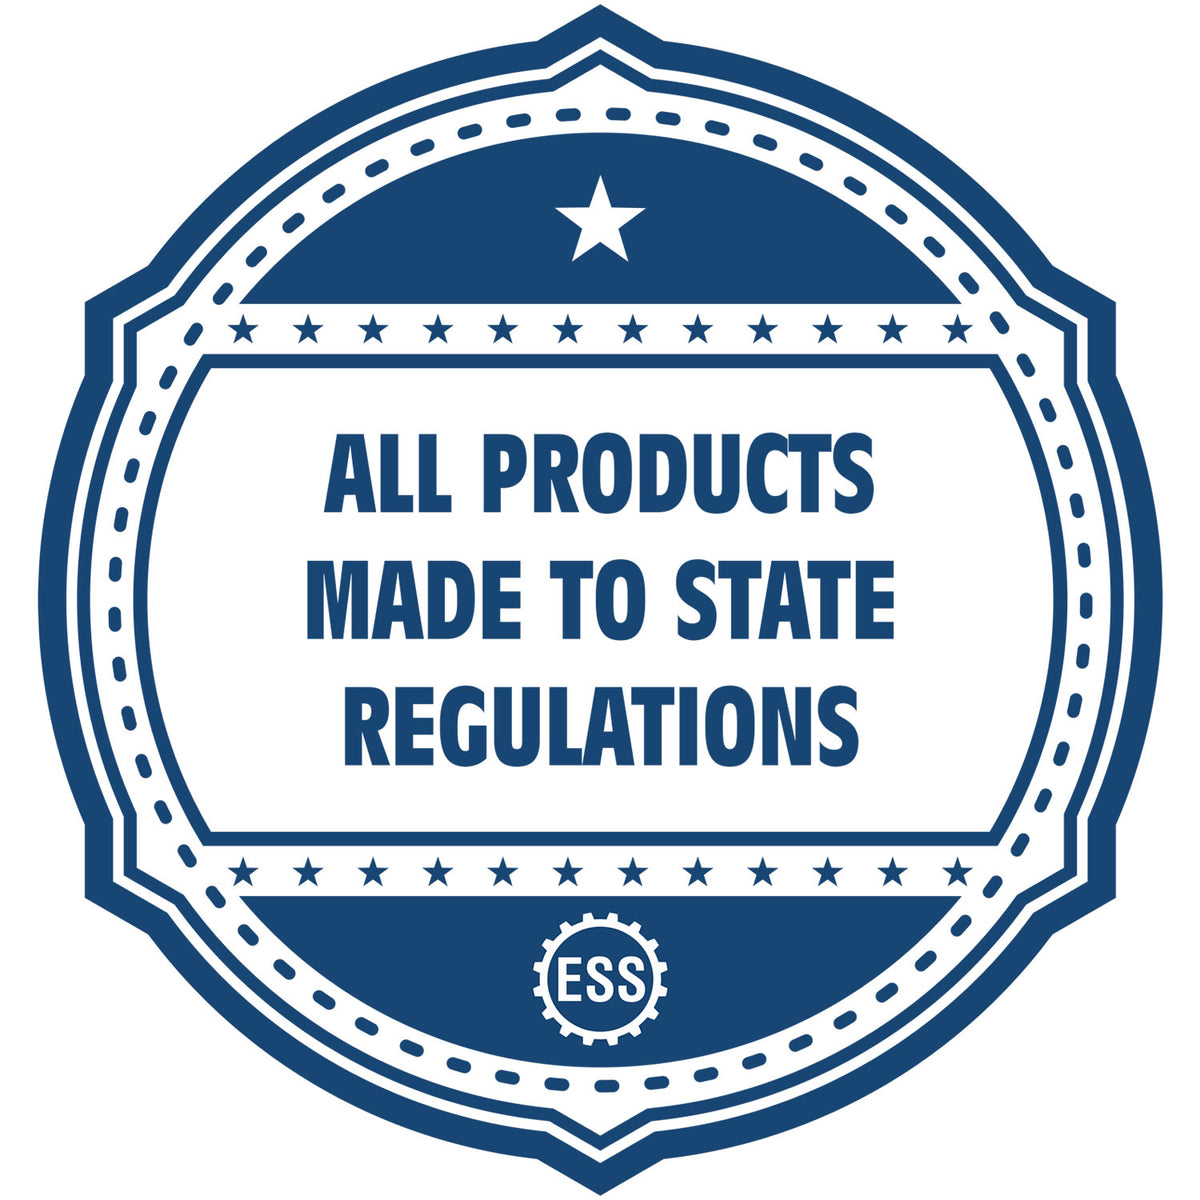 An icon or badge element for the State of Oklahoma Architectural Seal Embosser showing that this product is made in compliance with state regulations.